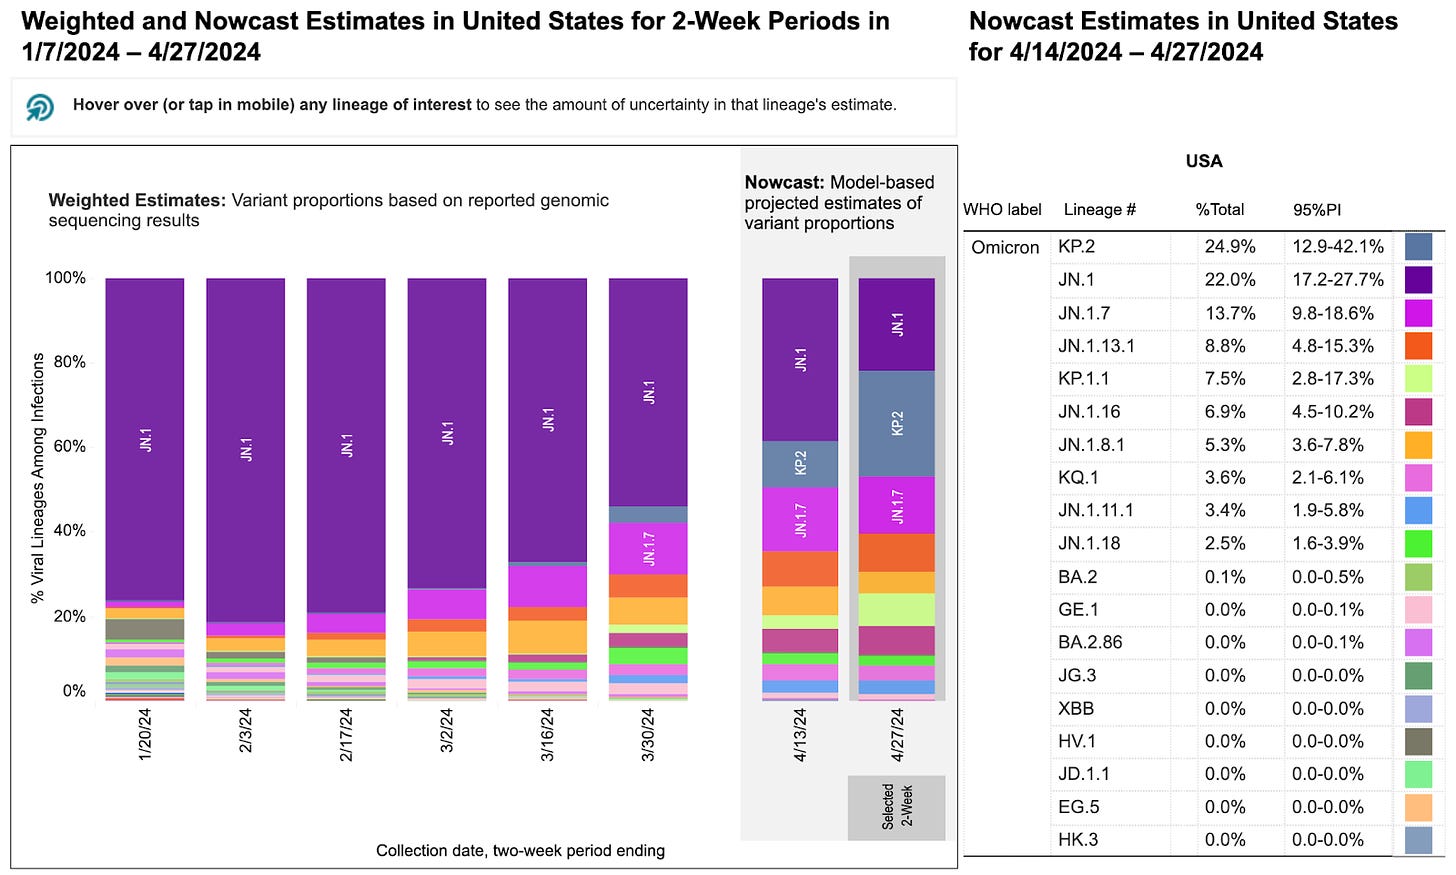 Two stacked bar charts with two-week periods for sample collection dates on the horizontal x-axis and percentage of viral lineages among infections on the vertical y-axis. Title of the first bar chart reads “Weighted Estimates: Variant proportions based on reported genomic sequencing results” with collection dates ranging from 1/7/24 to 4/27/2024. The second chart’s title reads “Nowcast: model-based projected estimates of variant proportions,” dates ranging from 4/13/24 to 4/27/2024. In the Nowcast Estimates for the period ending on 4/13/24, JN.1 (dark purple) is projected to be the highest at 38.8 percent, JN1.13 (dark pink) is 15.1 percent and KP.2 (blue) is 10.7%. Other variants are at smaller percentages represented by a handful of other colors as small slivers. The legend with a list of variants, proportions, and their associated colors is on the far right of the bar charts.